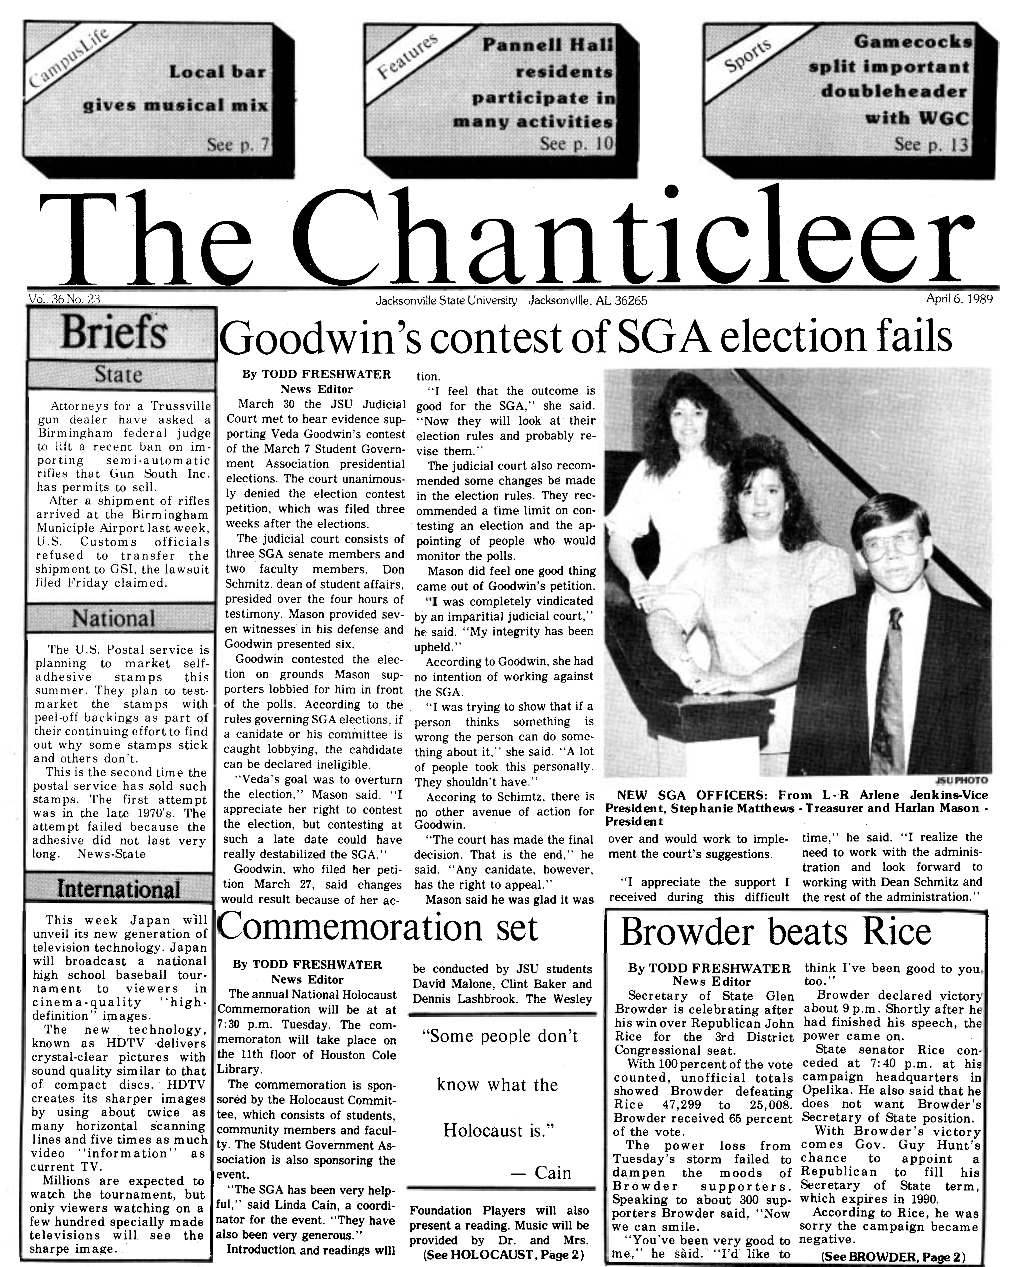 Goodwin's Contest of SGA Election Fails by TODD FRESHWATER Tion